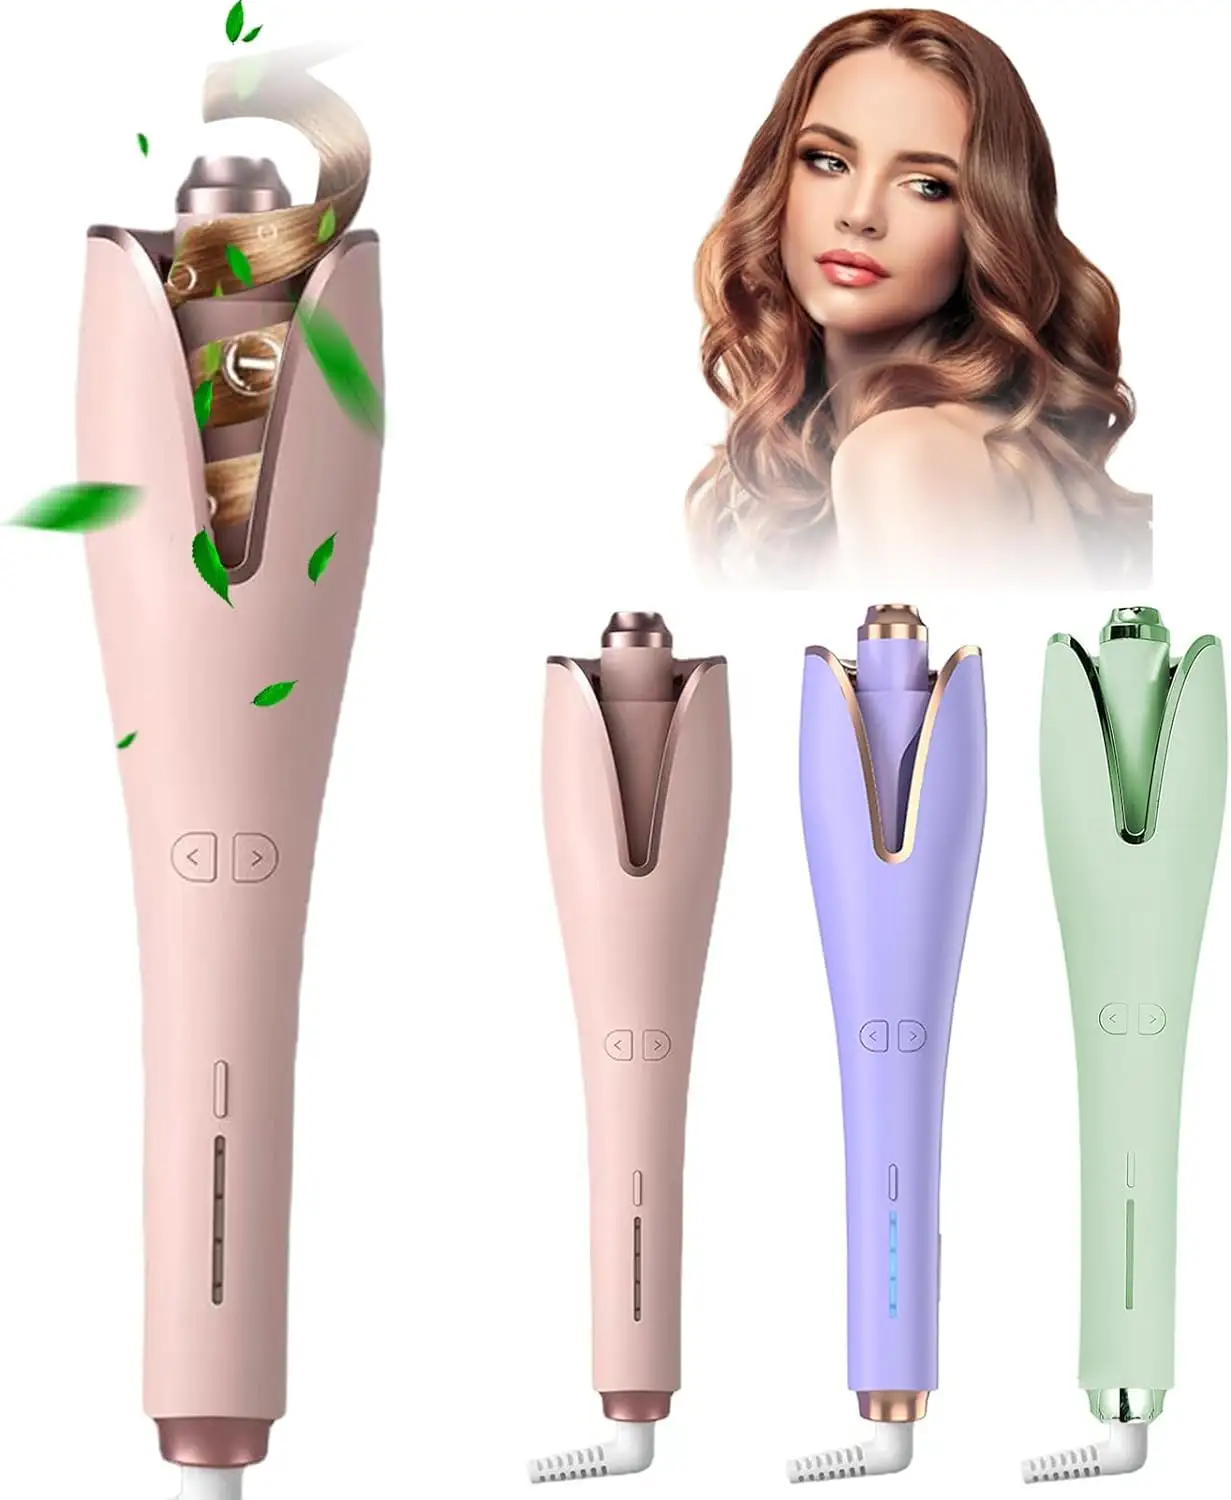 Automatic Hair Curling Iron with 4 Temperature Displays for Women Hair Styling